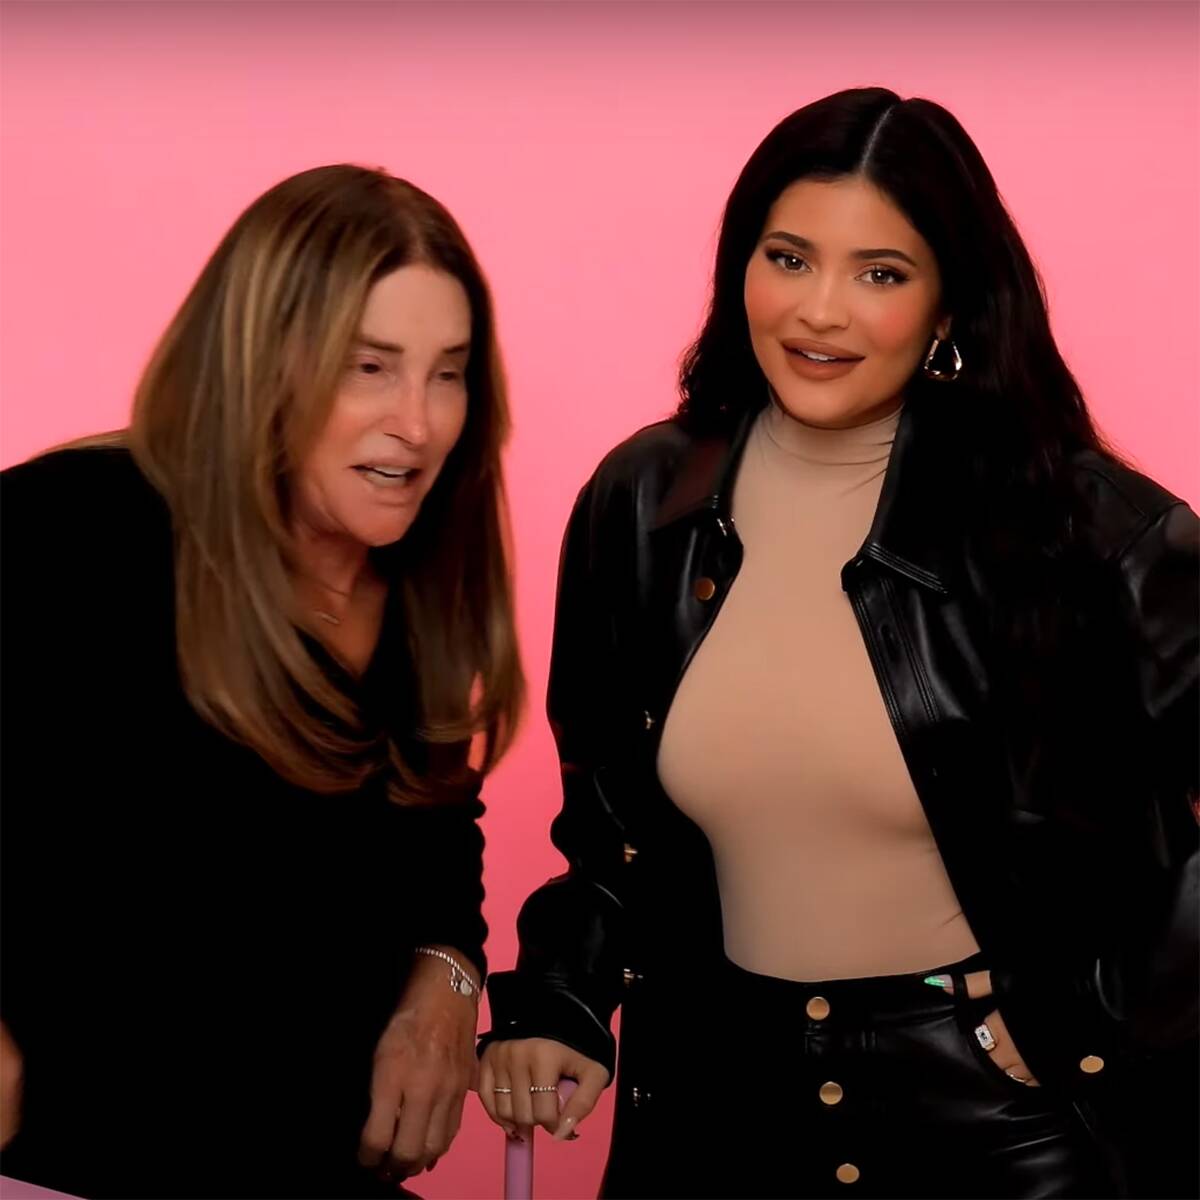 Watch Kylie Jenner Give Caitlyn Jenner an Ultra-Glam Makeover for the First Time